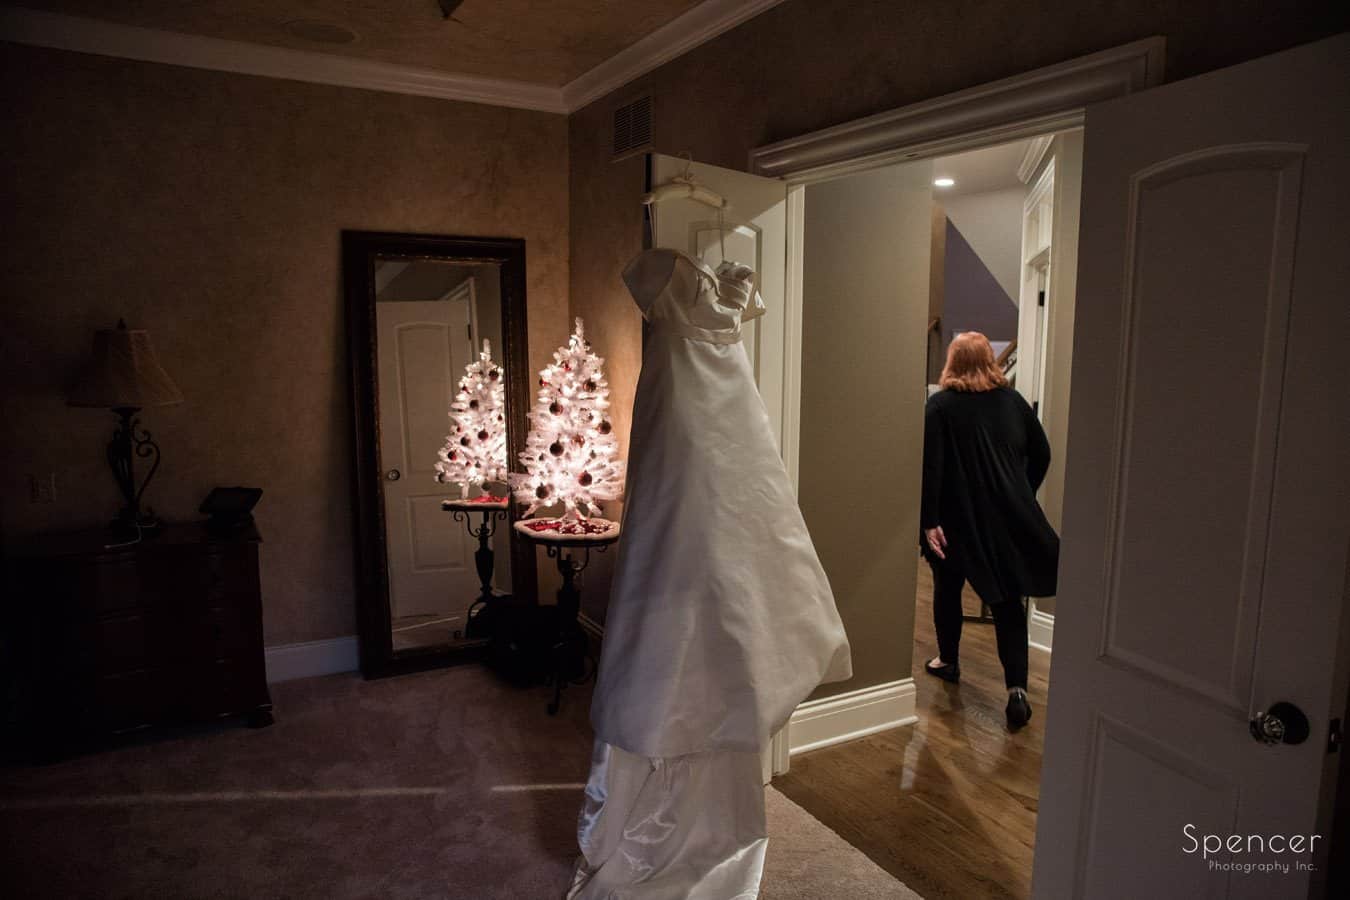  wedding dress haning with christmas tree in background